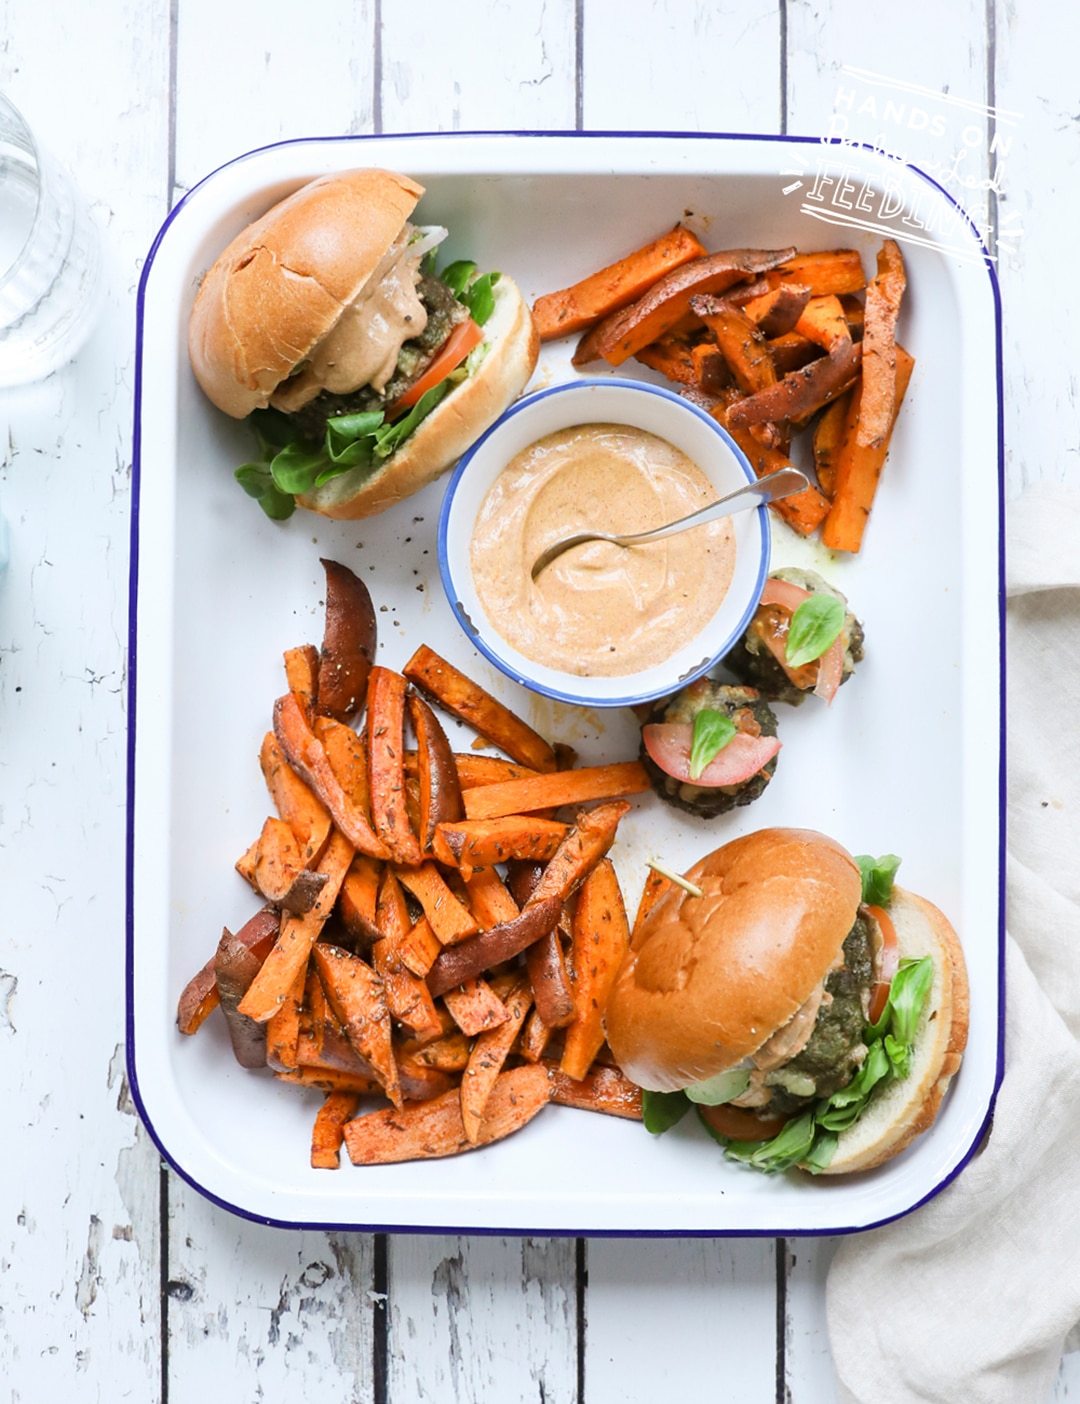 Veggie Loaded Baby Burgers with Cajun Sauce. This little burger is like an entire salad cooked into a slider sized burger! Served with a zesty (not spicy) yogurt based Cajun sauce and crispy-sweet sweet potato fries. #babyledweaning #sliders #bbq #healthyrecipe